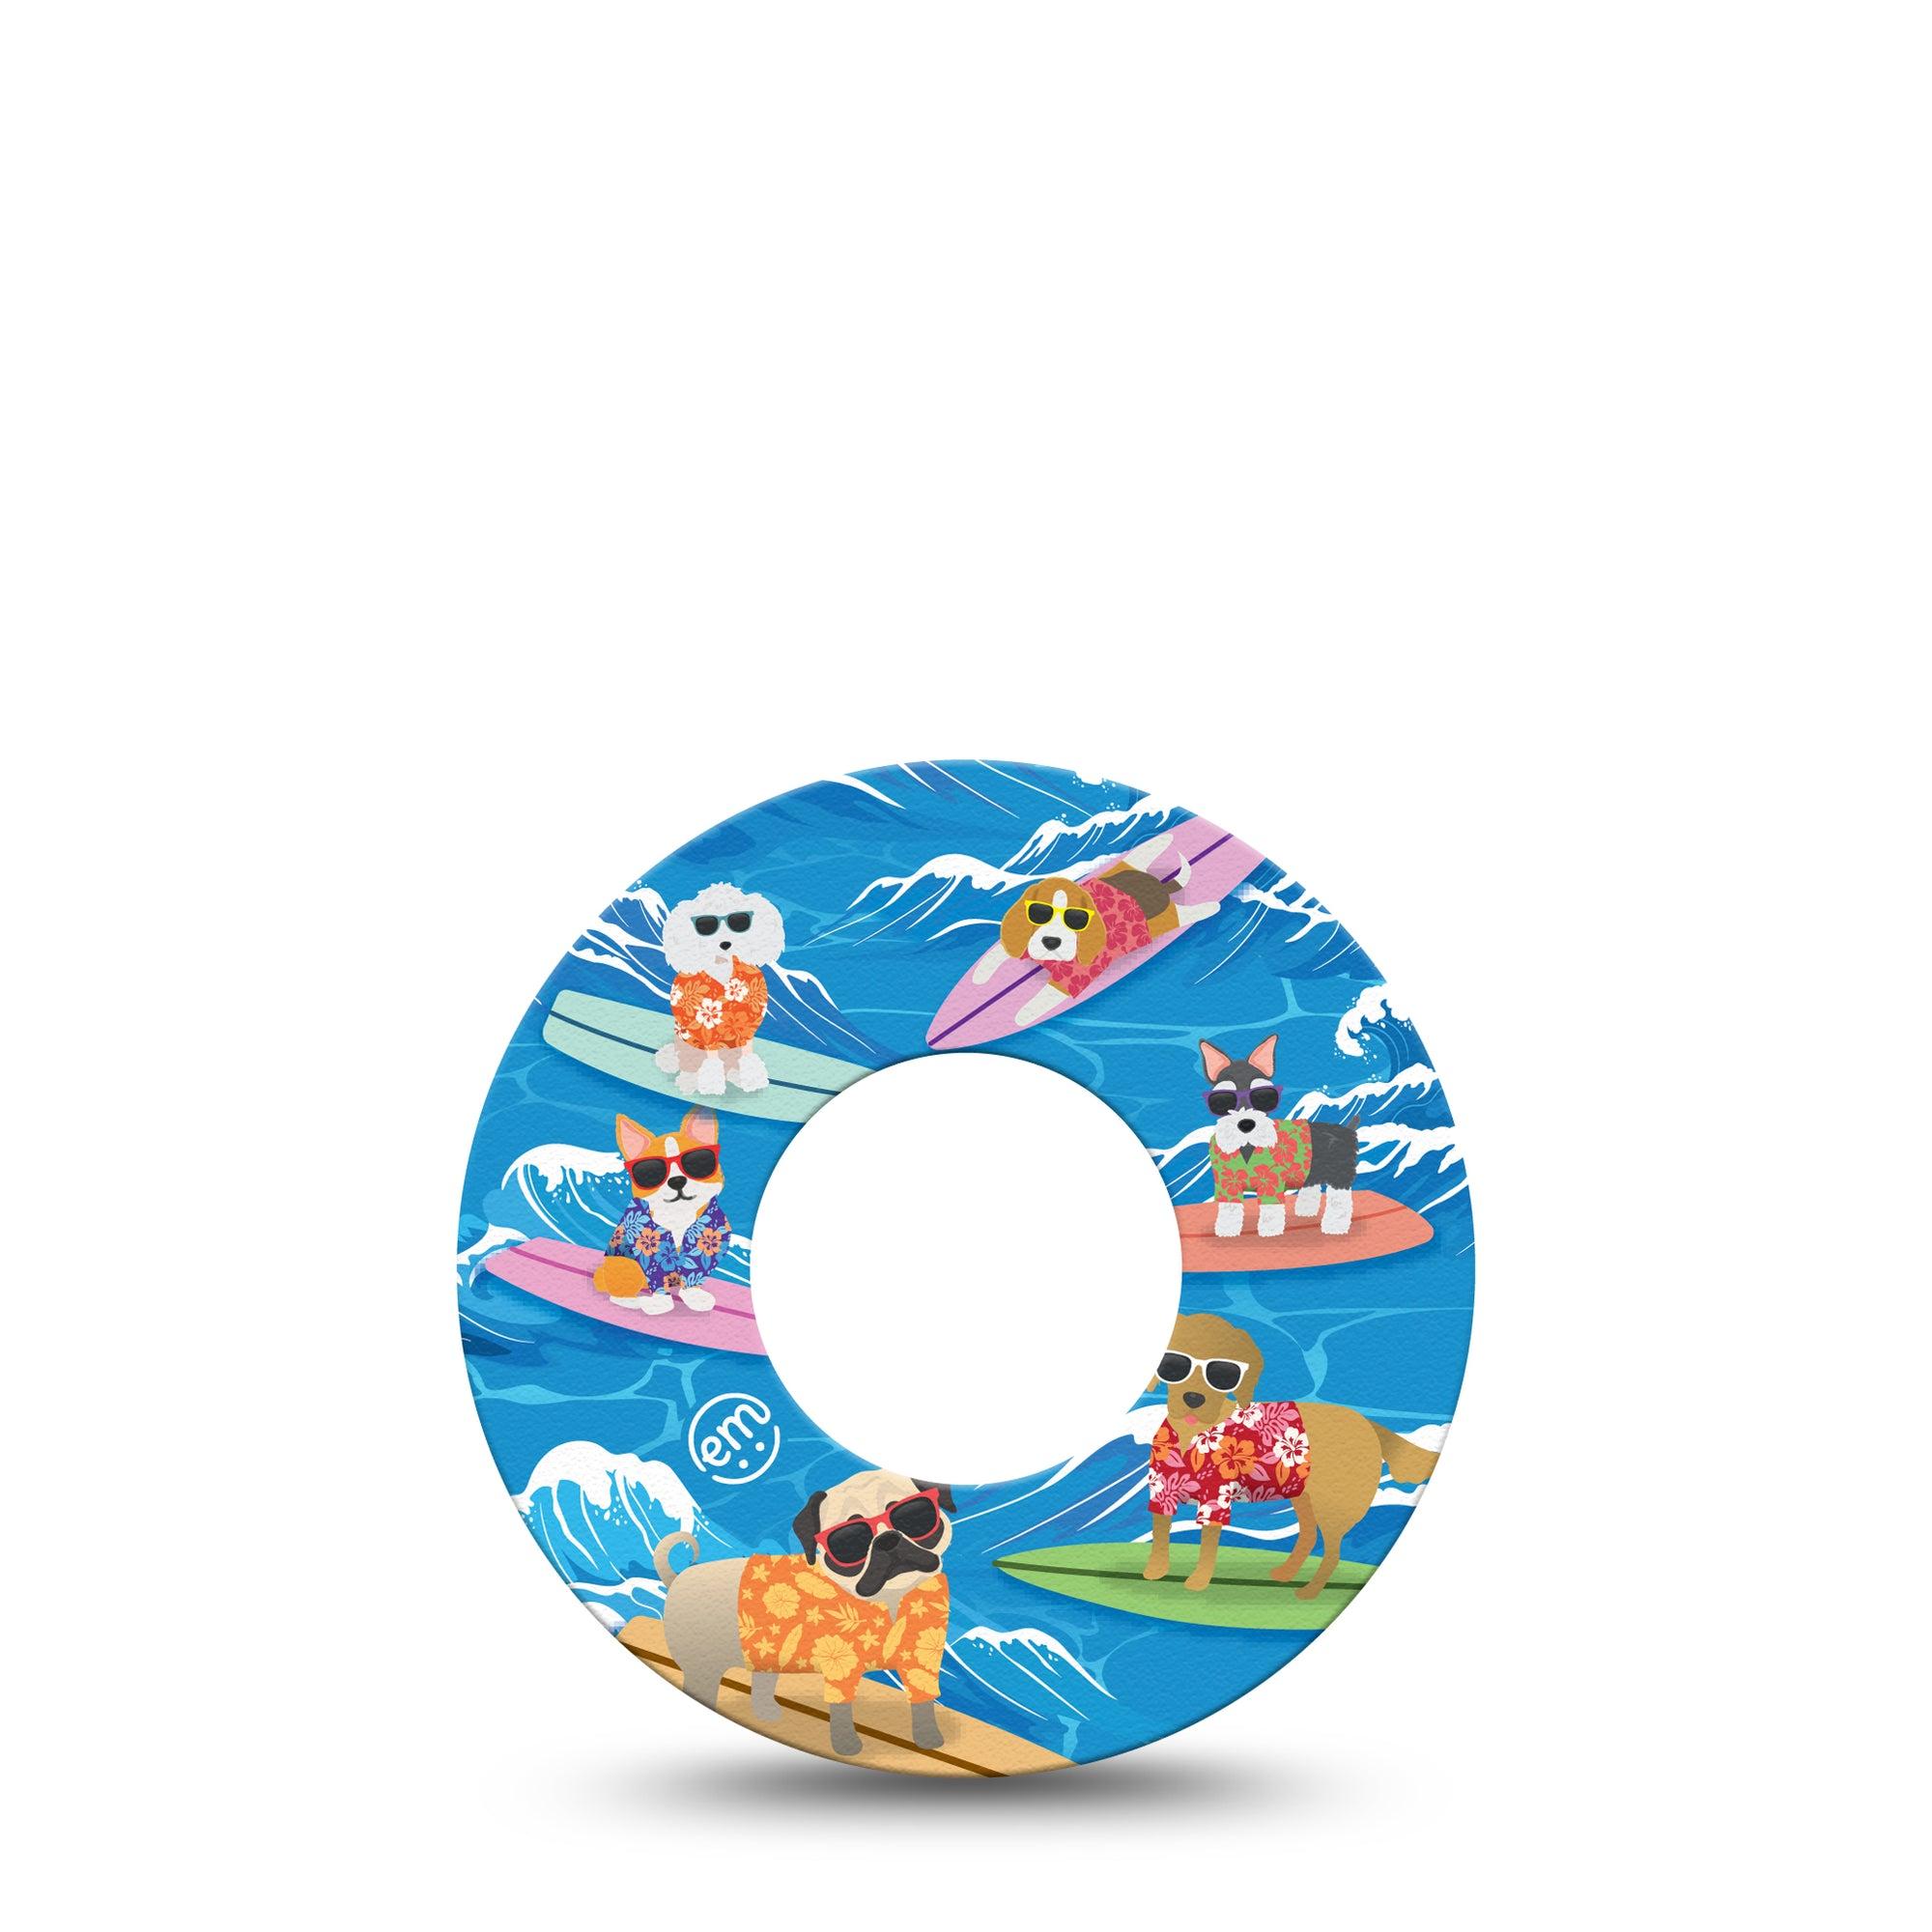 ExpressionMed Surfing Dogs Libre 2 Tape, Single, Hobby Animals Themed, CGM Overlay Patch Design